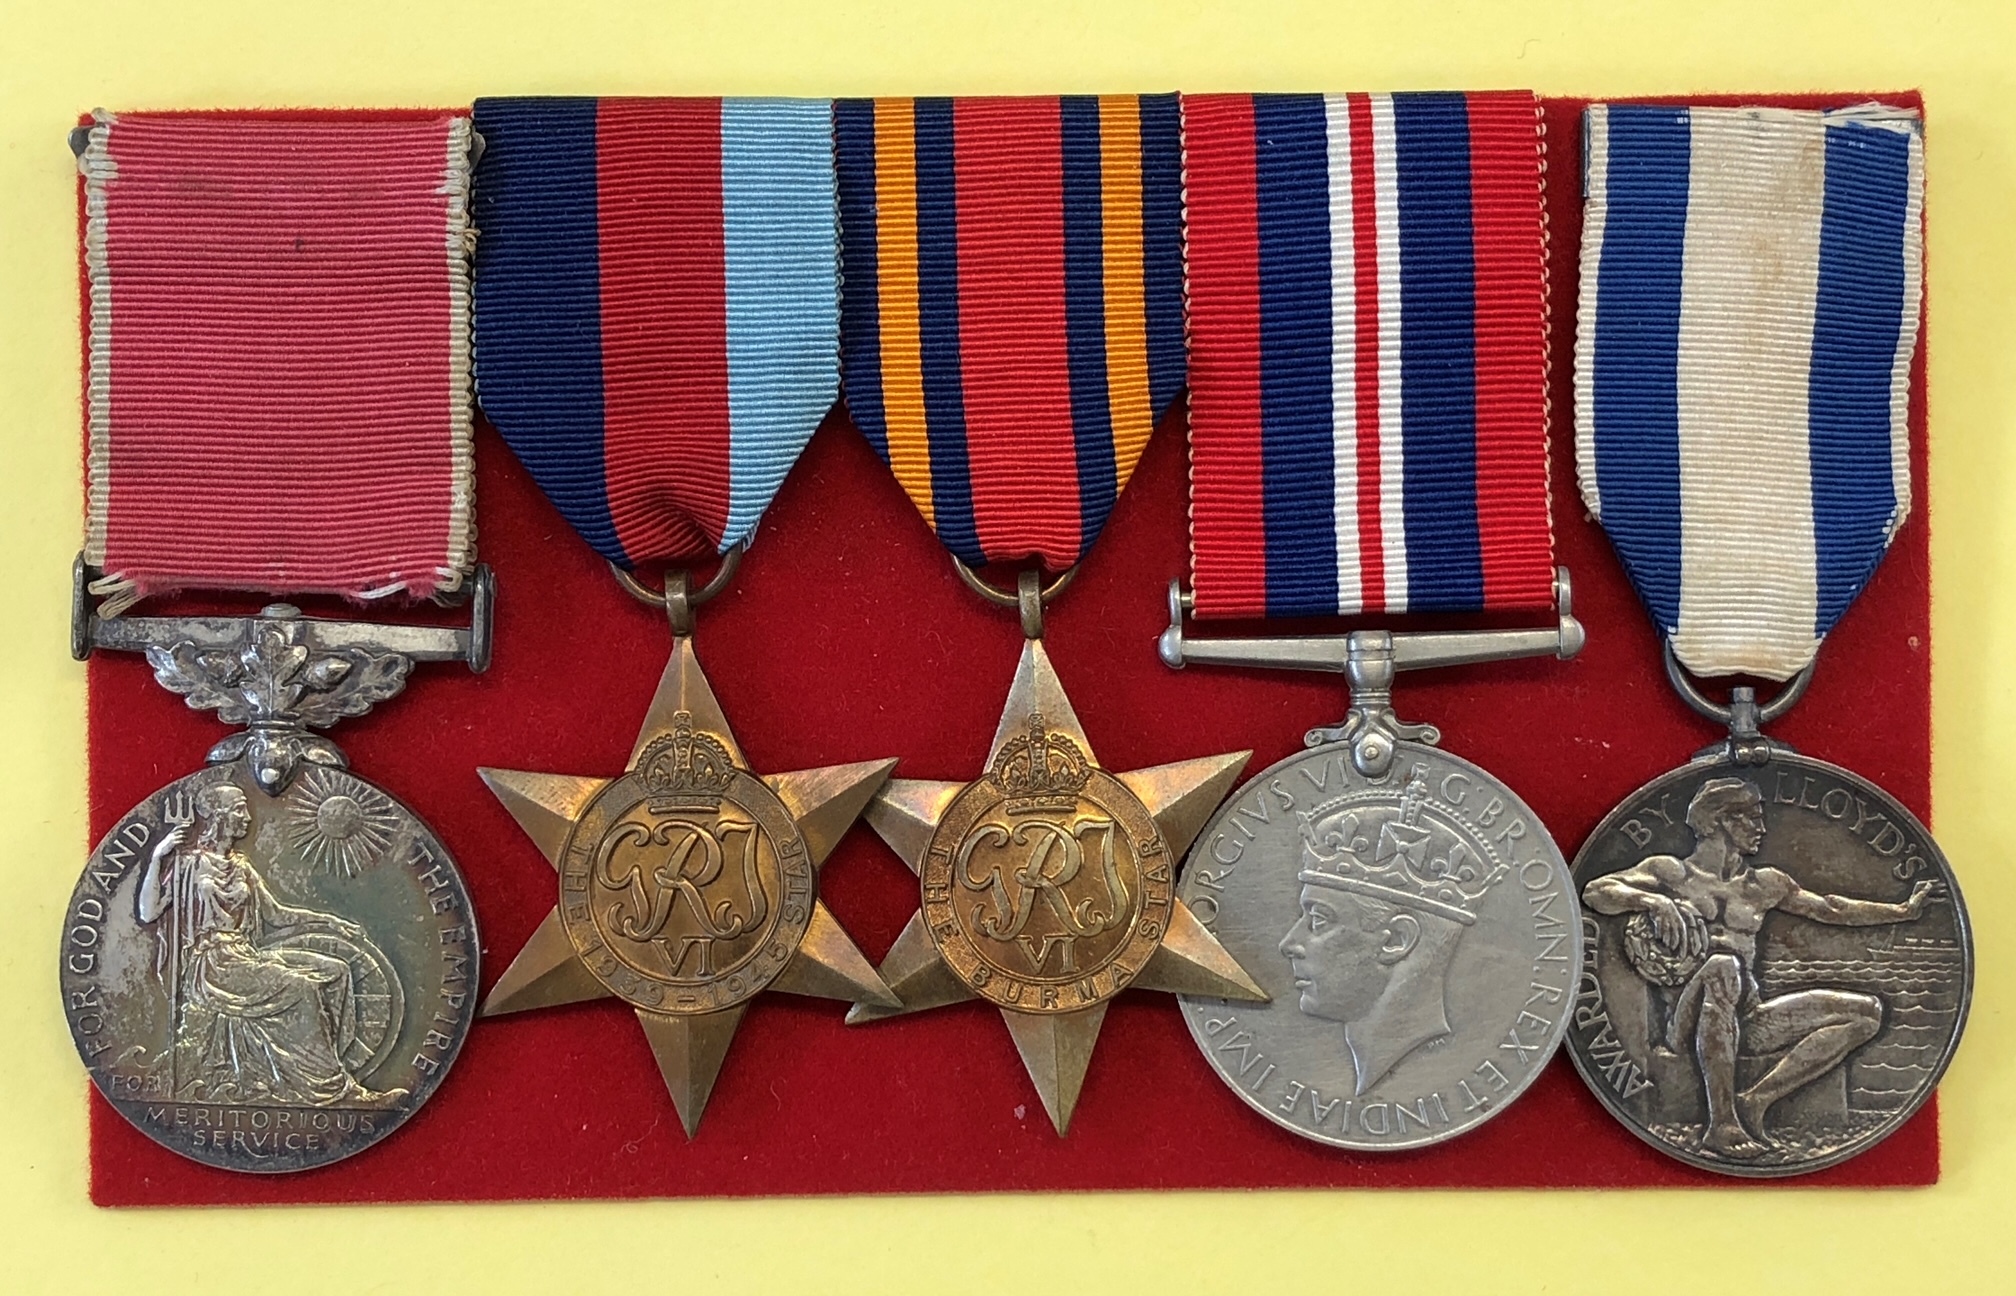 Apprentice seaman's medals at Charterhouse auction